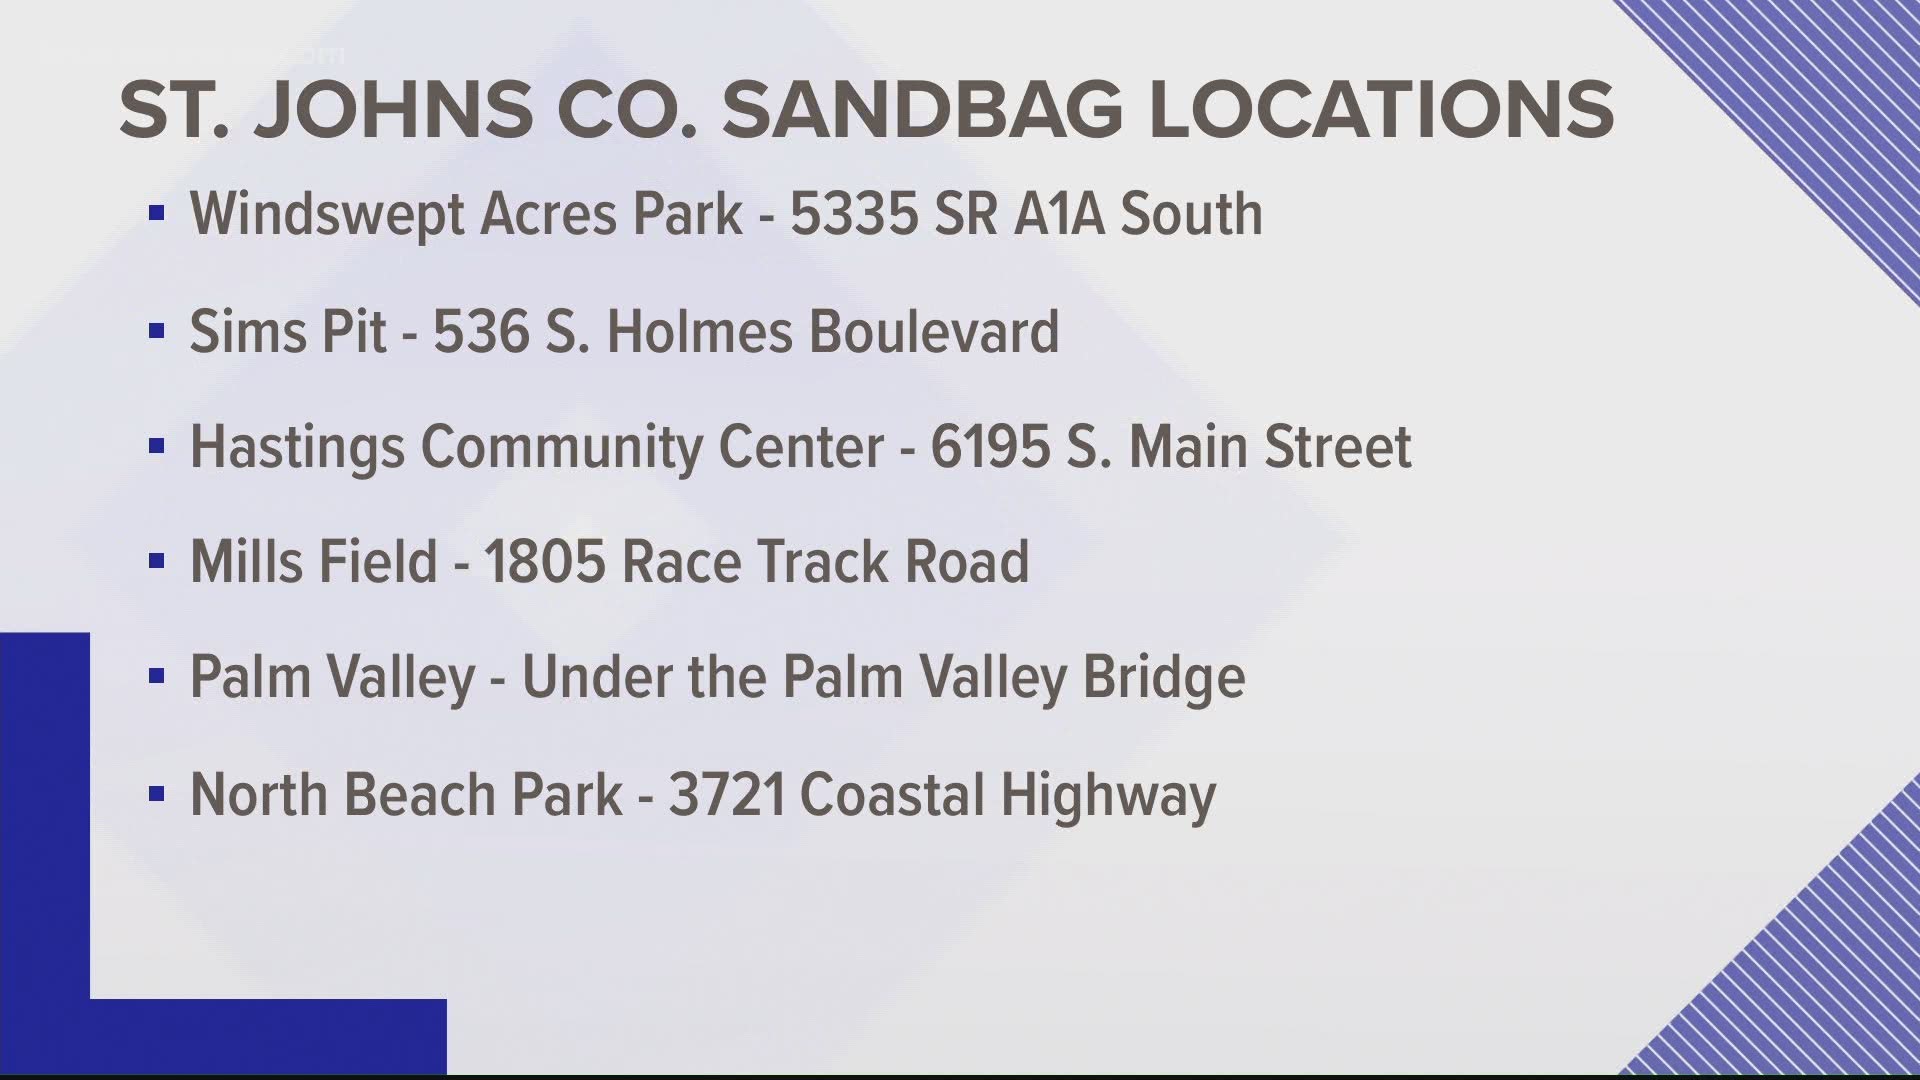 Here is where you can buy sandbags on the First Coast ahead of Hurricane Isaias.